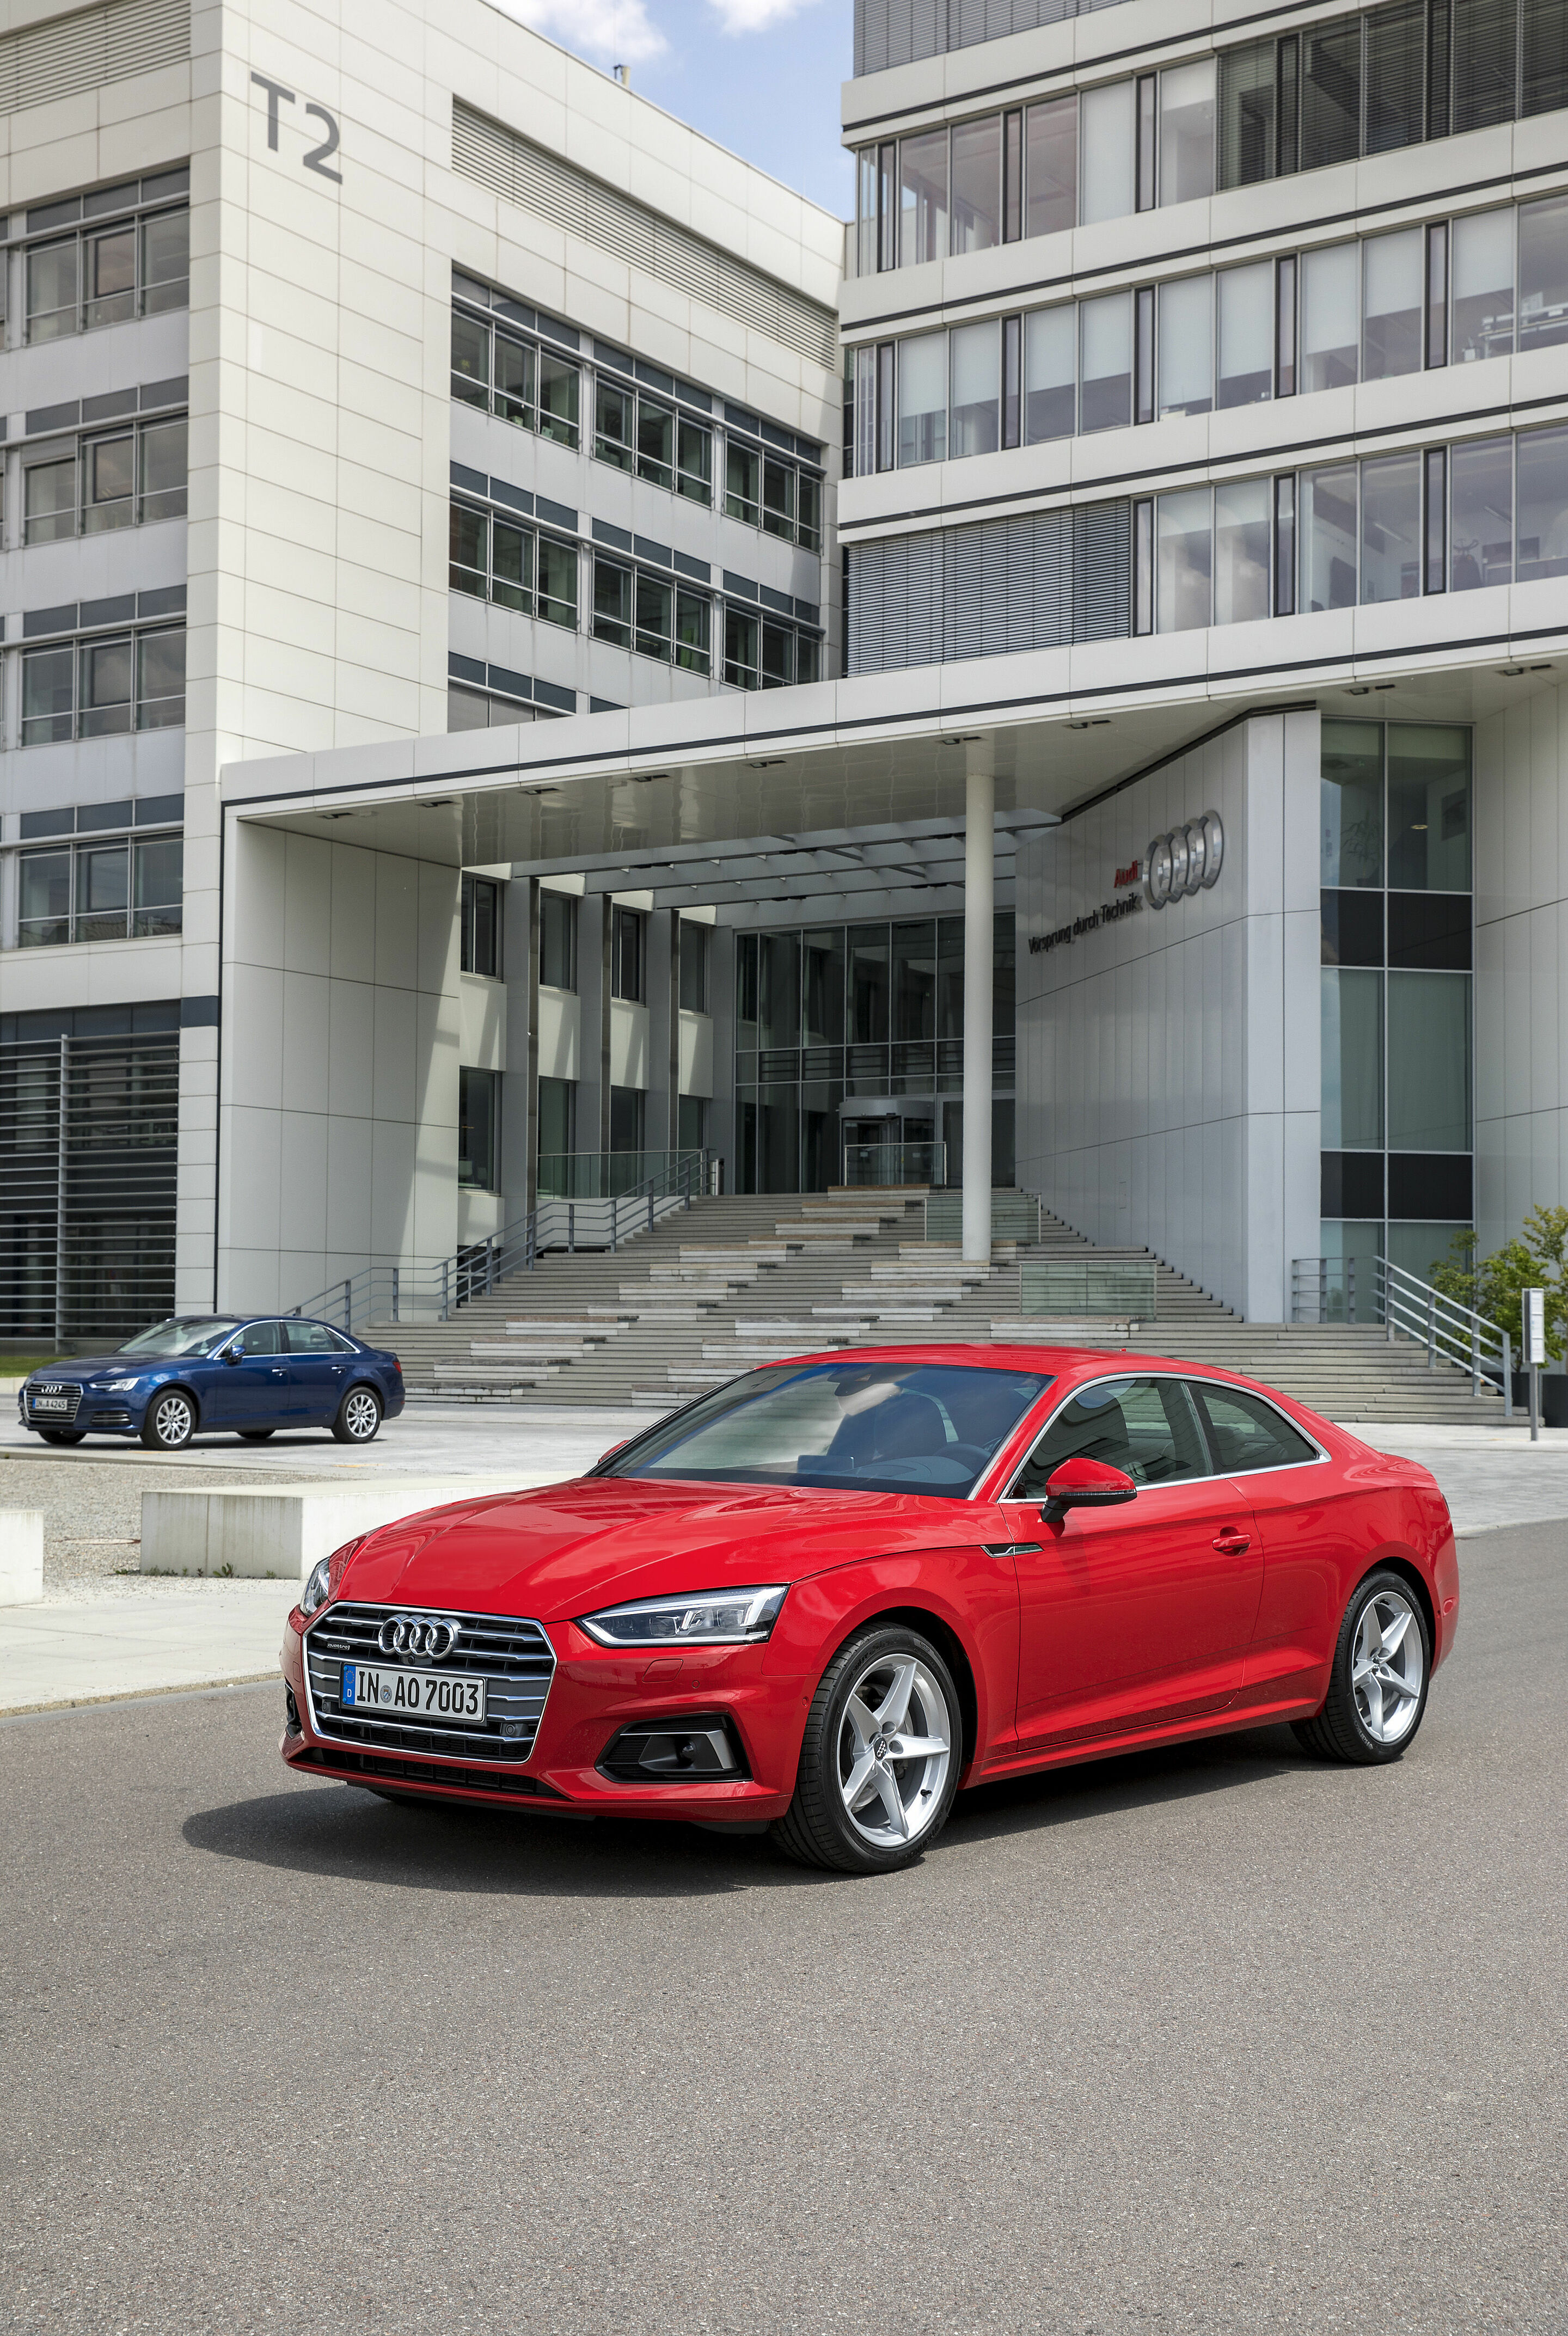 Audi S5 Coupé at the “SE Building“  of the Technical Development at the Headquarters in Ingolstadt